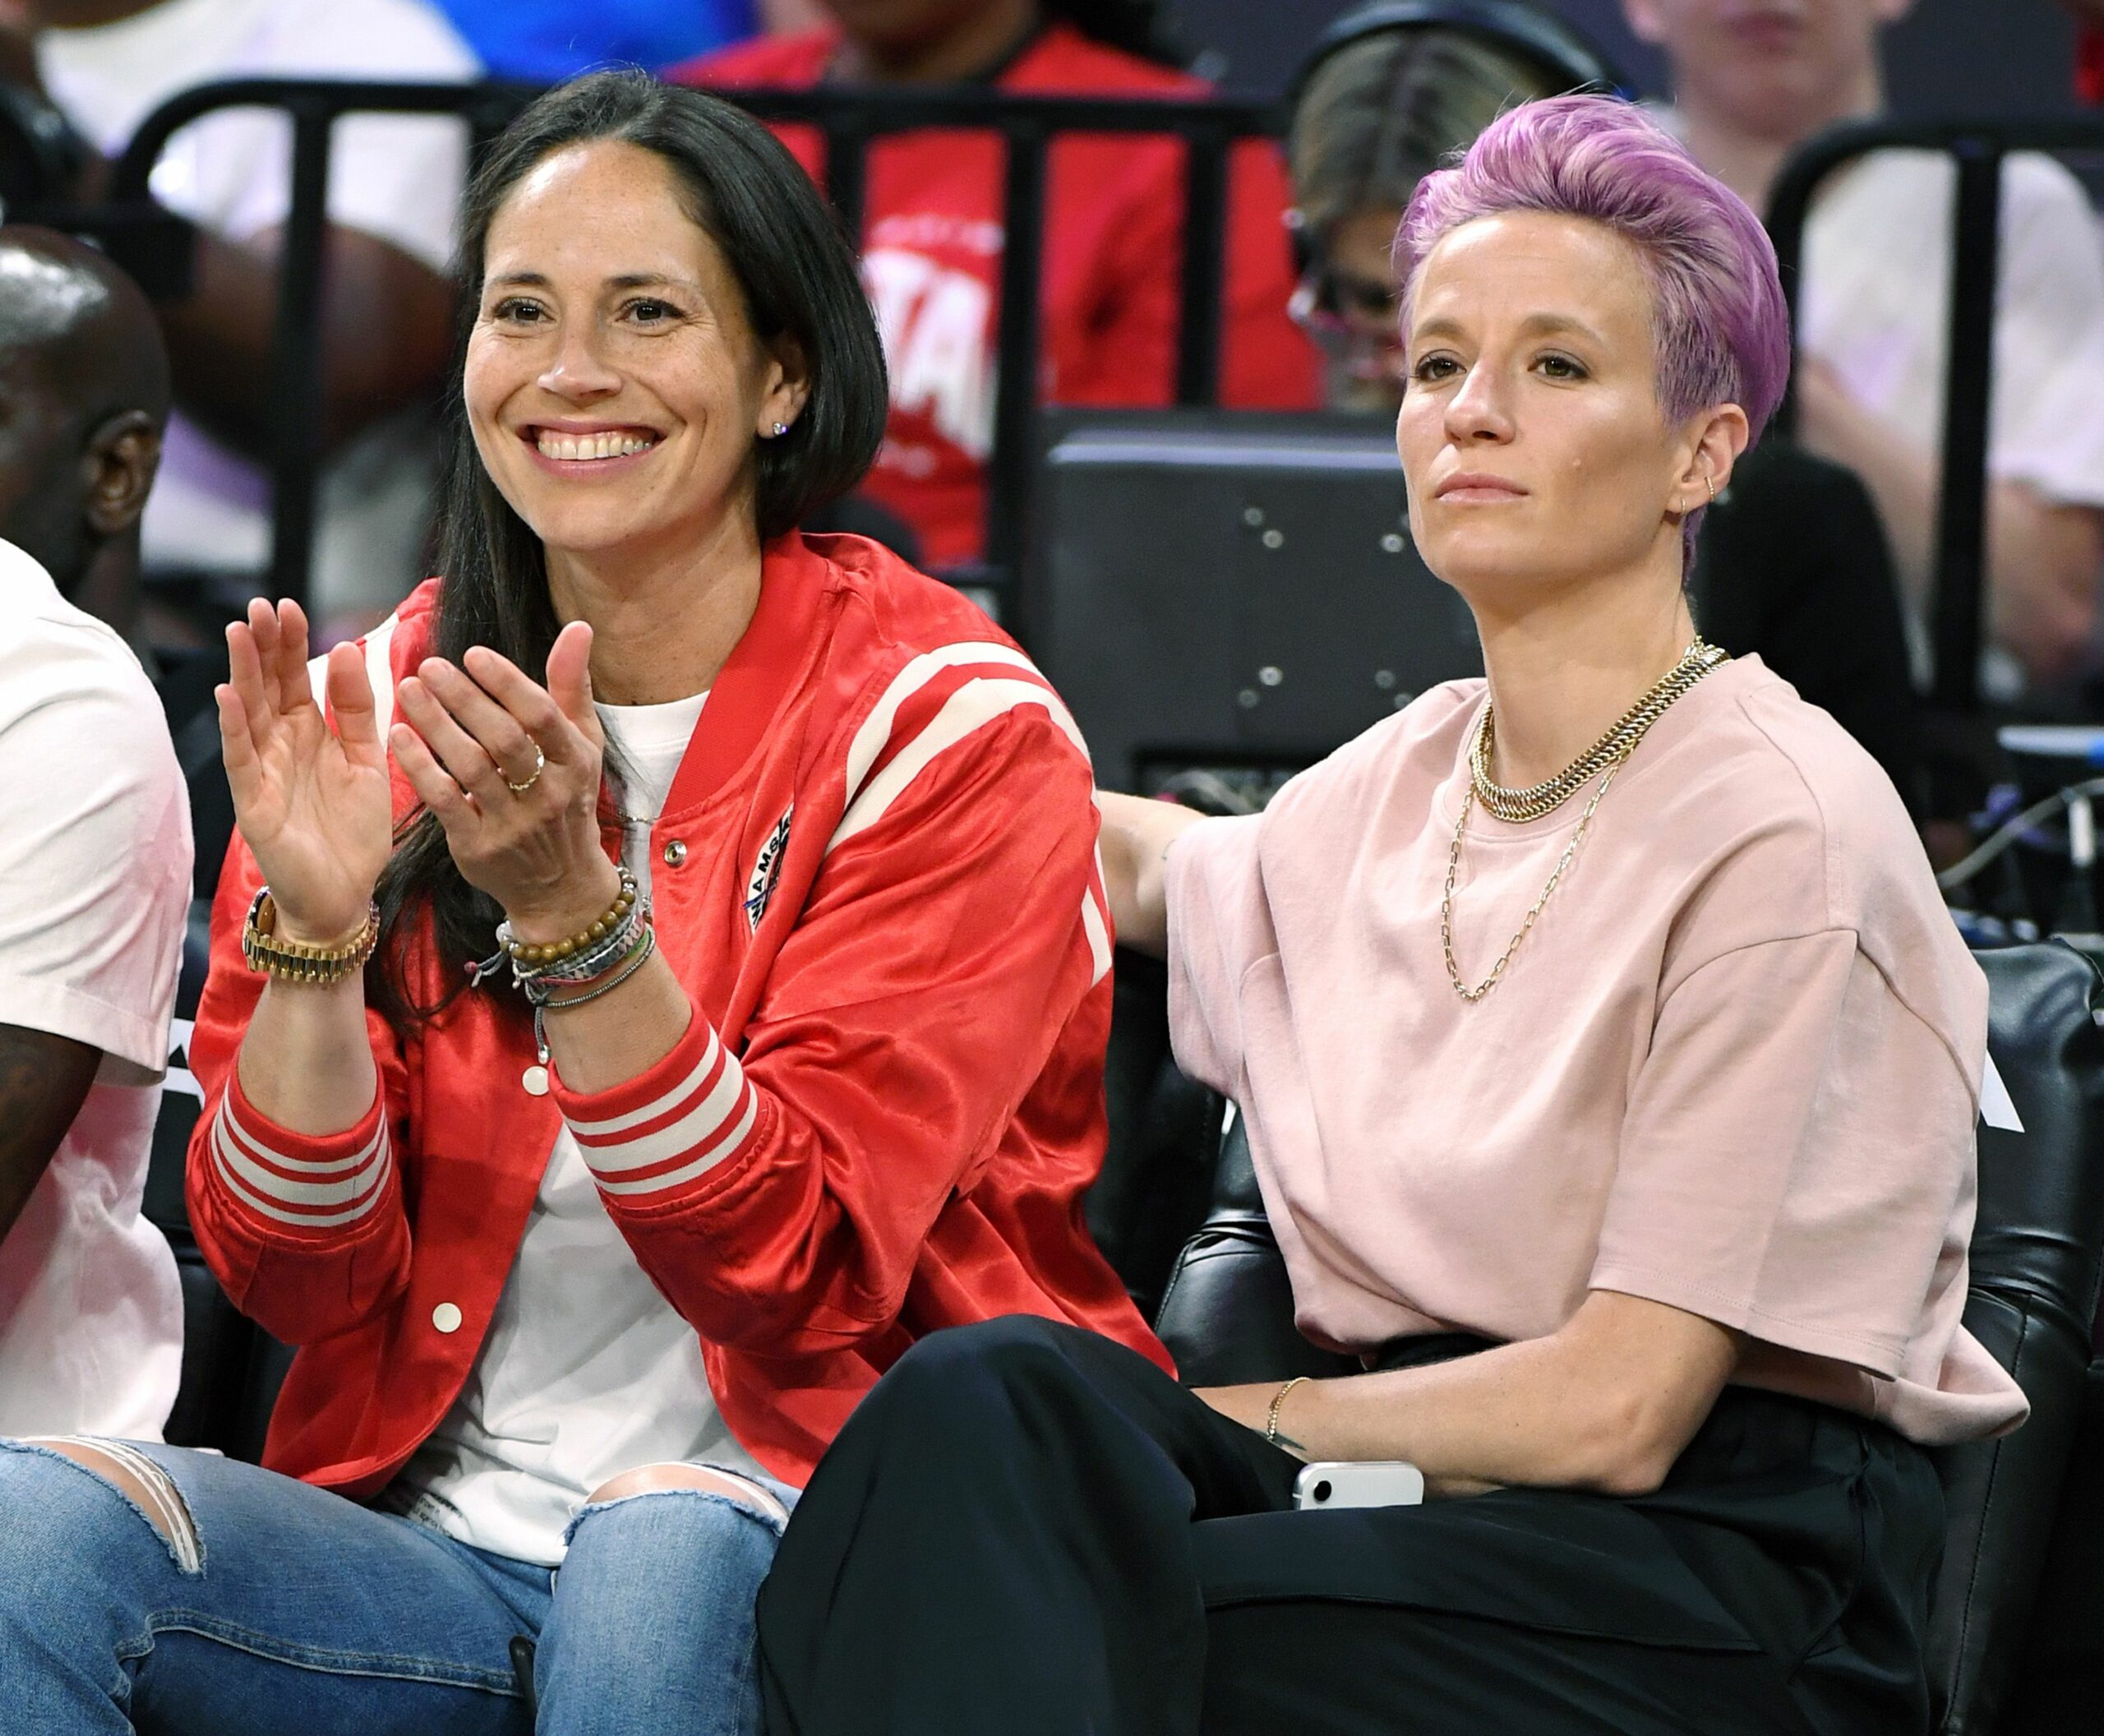 Unstoppable Star: How Sue Bird Became A Legend On The Court